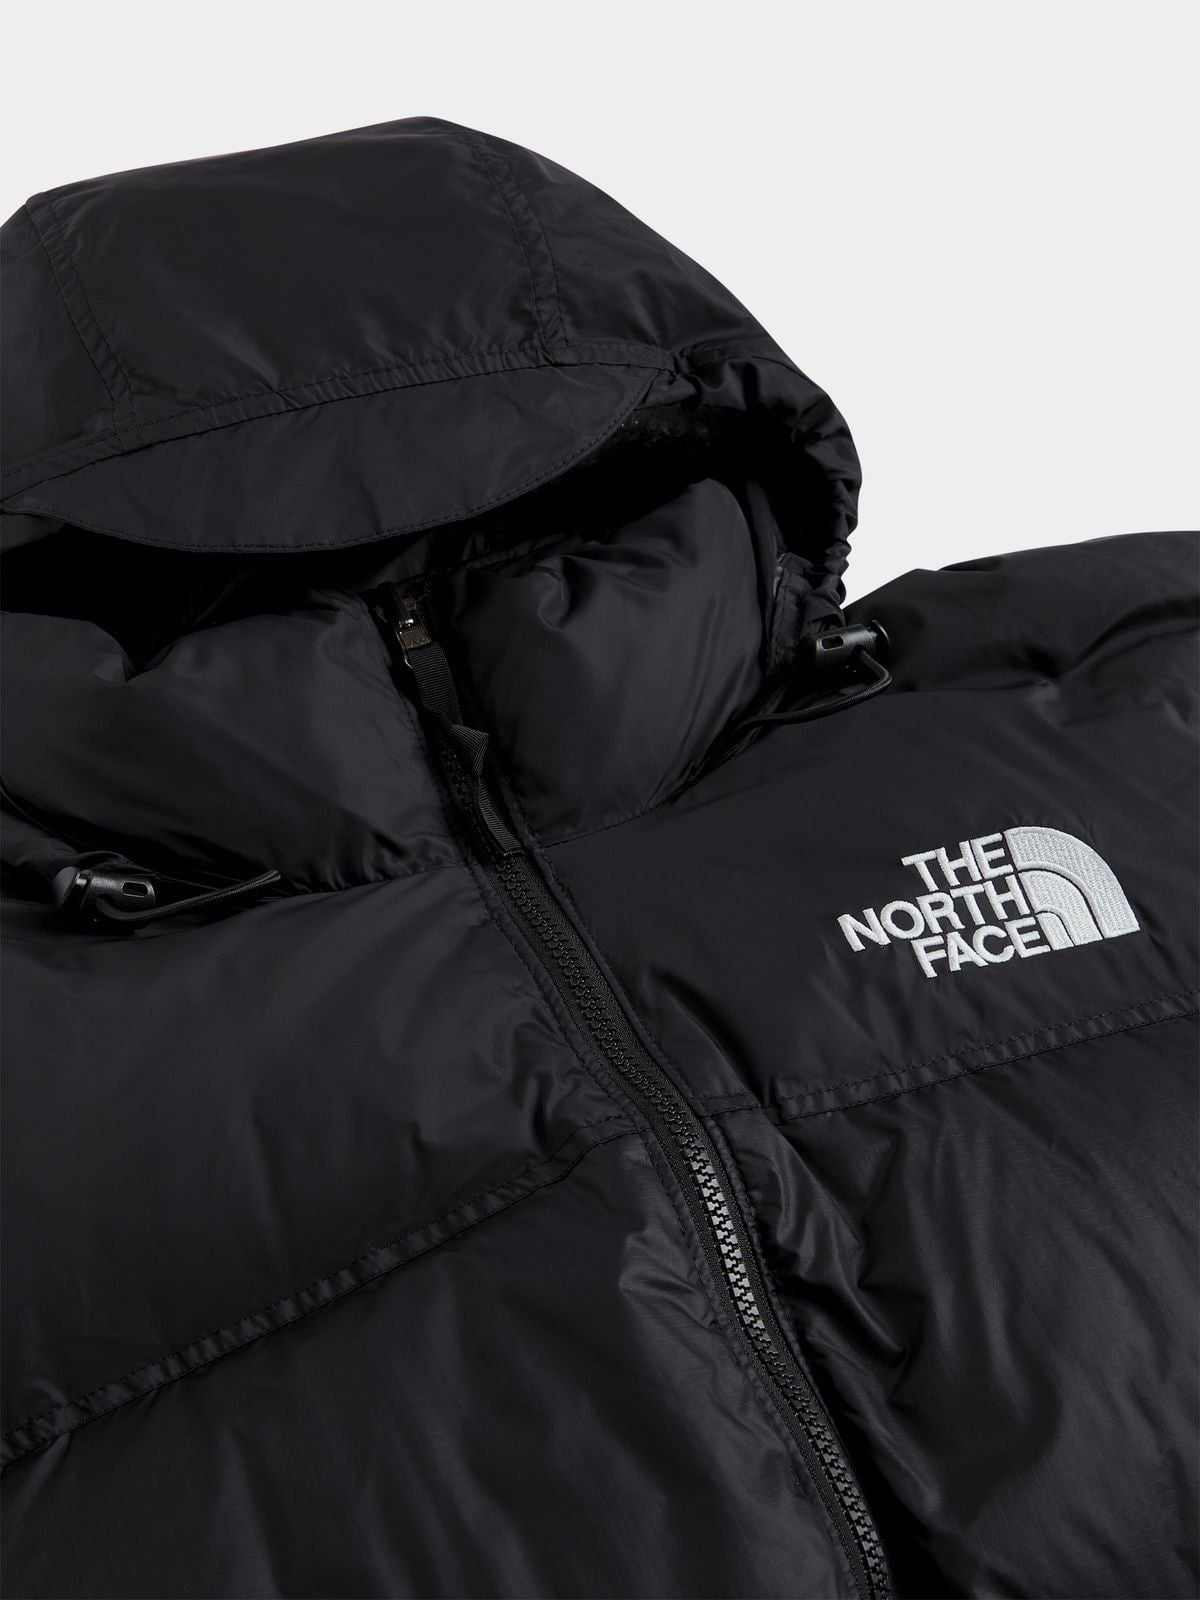 The North Face Men's 1996 Nuptse Black Jacket
The North Face